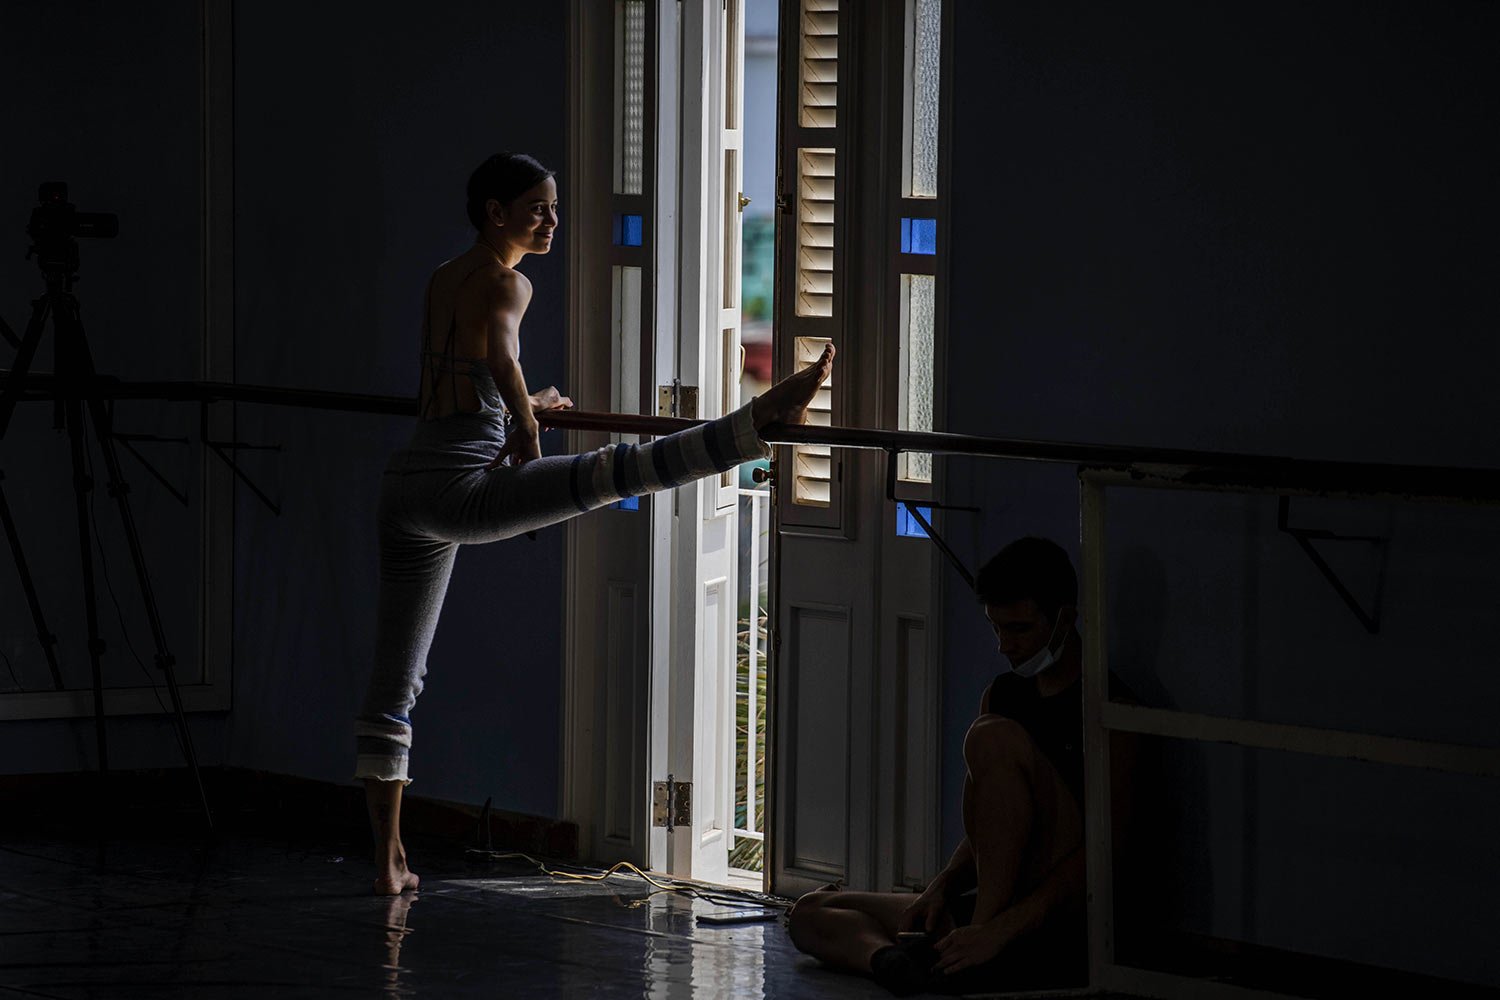  A dancer in Cuba's National Ballet stretches before rehearsing at the ballet's school in Havana, Cuba, April 5, 2022. The National Ballet of Cuba starts rehearsal to return to the stage after more than a year following the COVID-19 pandemic shut dow